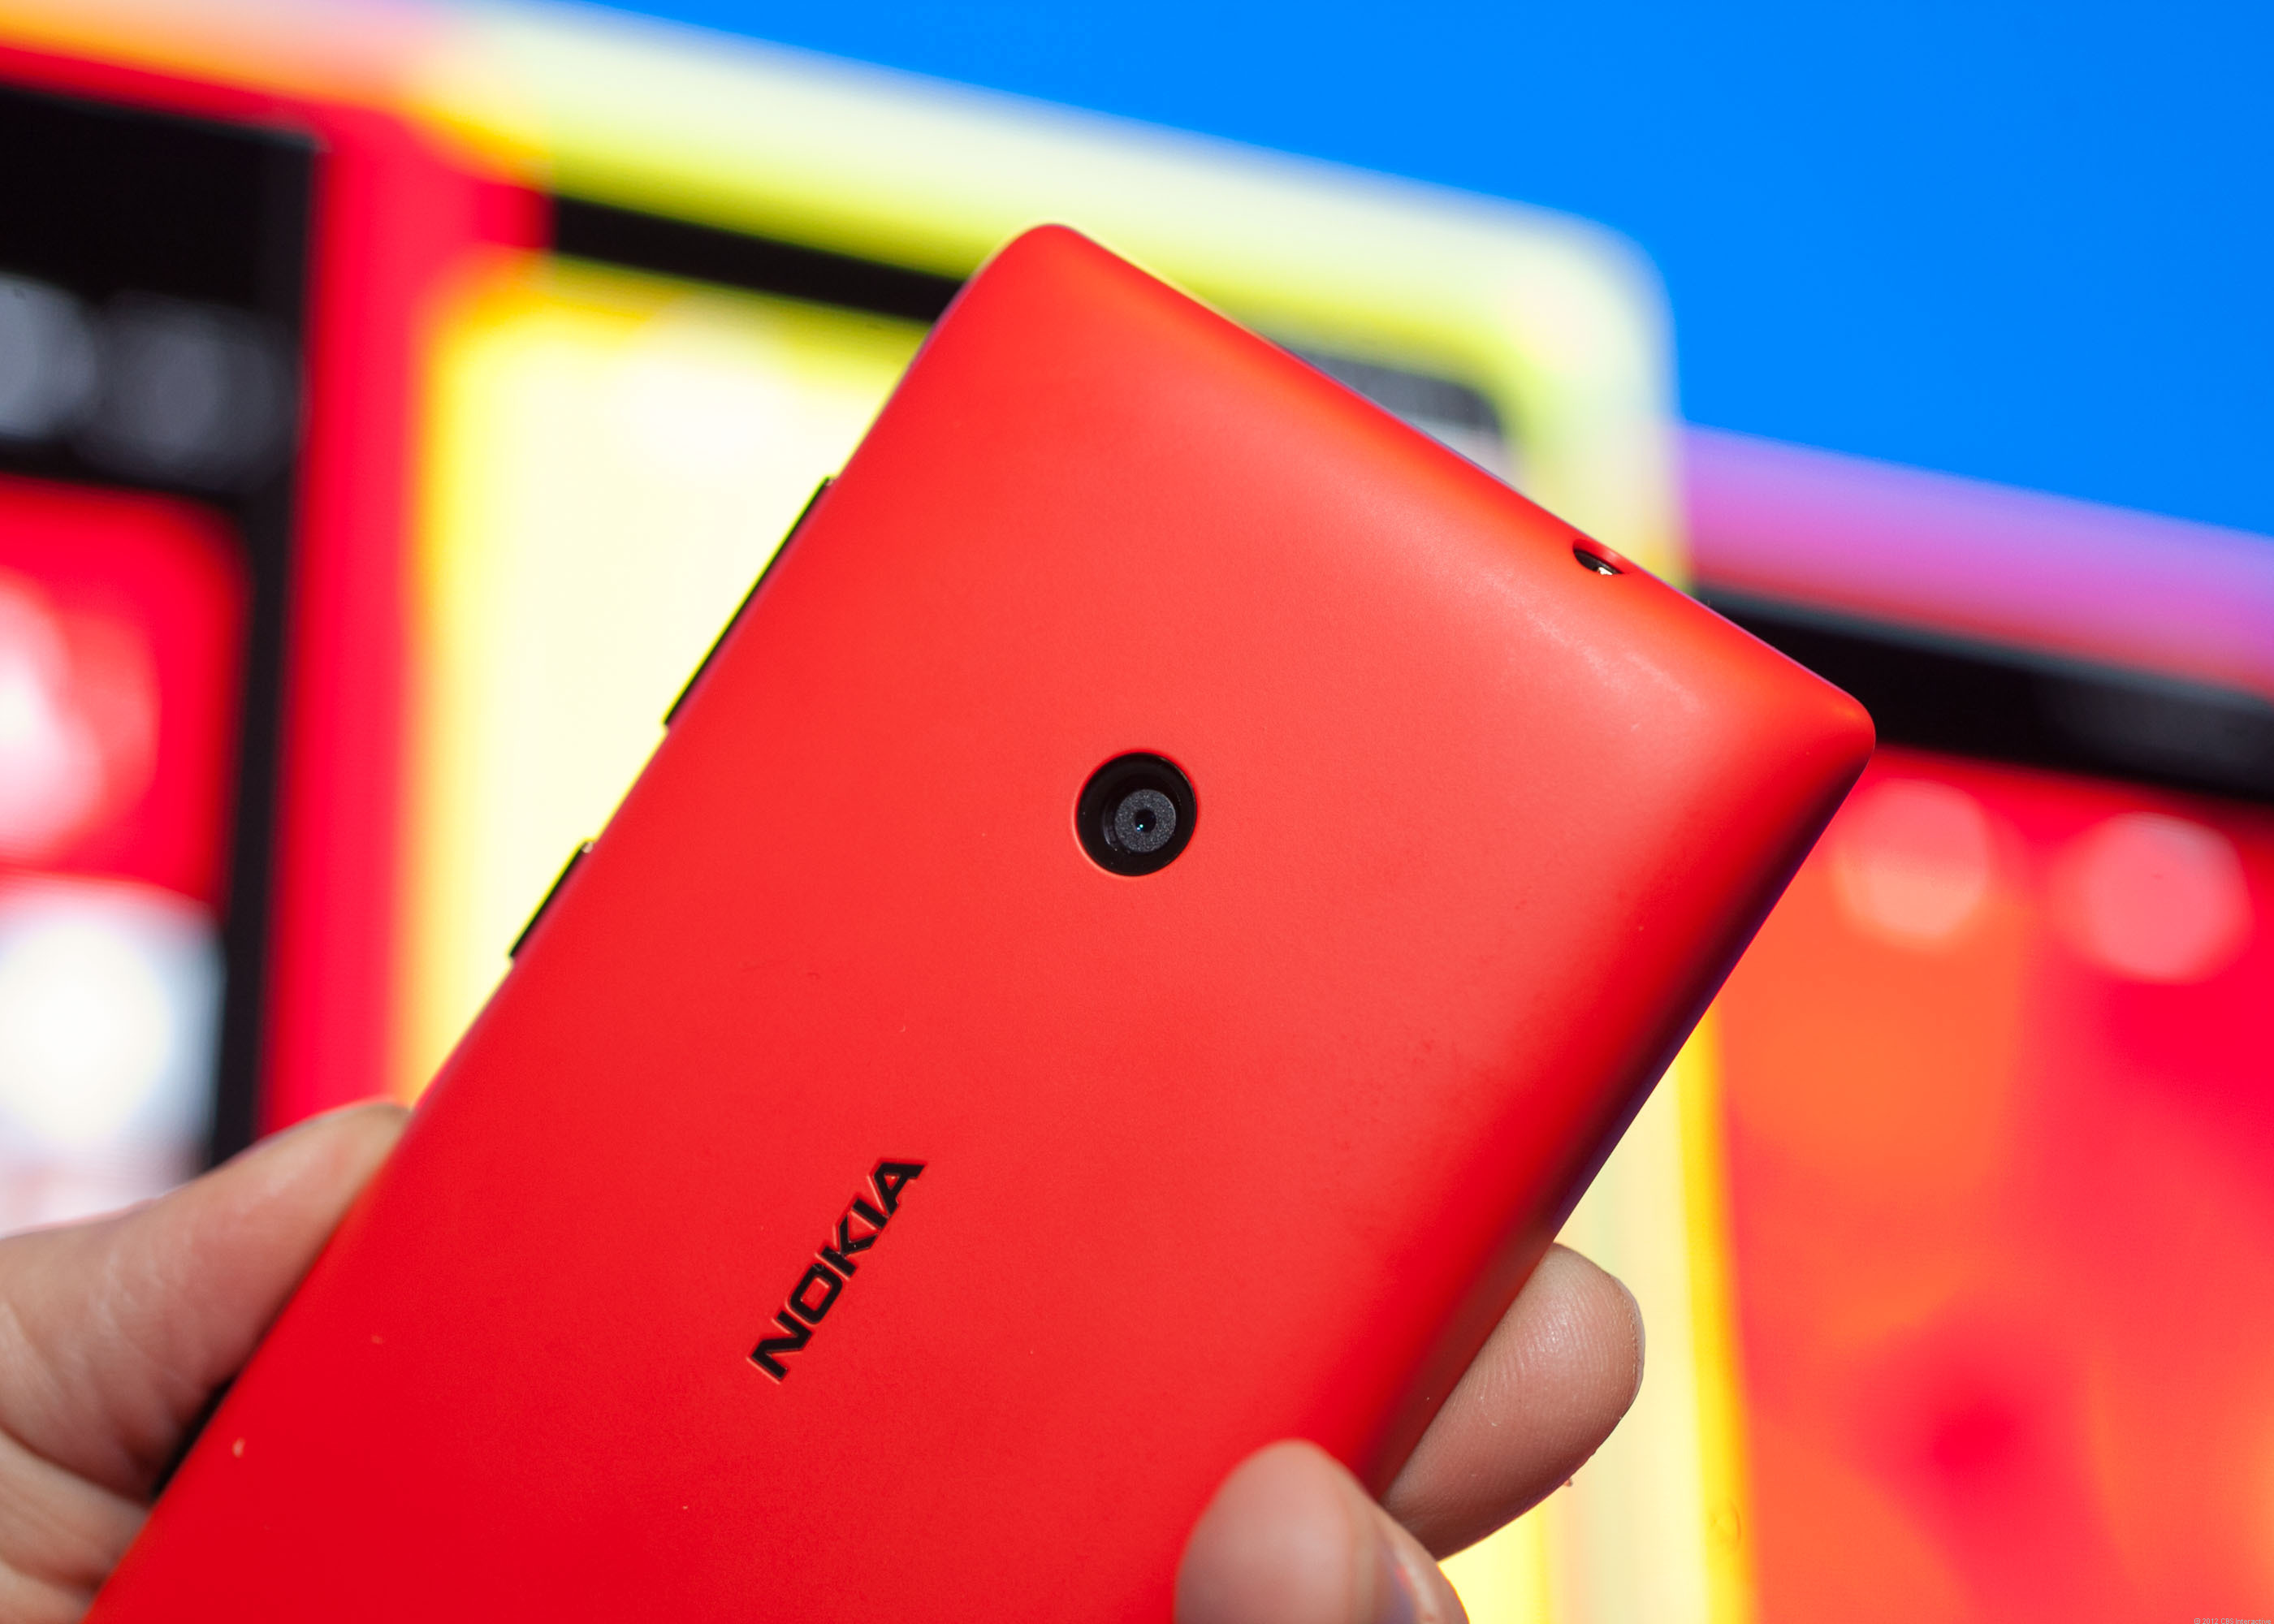 games for nokia lumia 520 from umnet